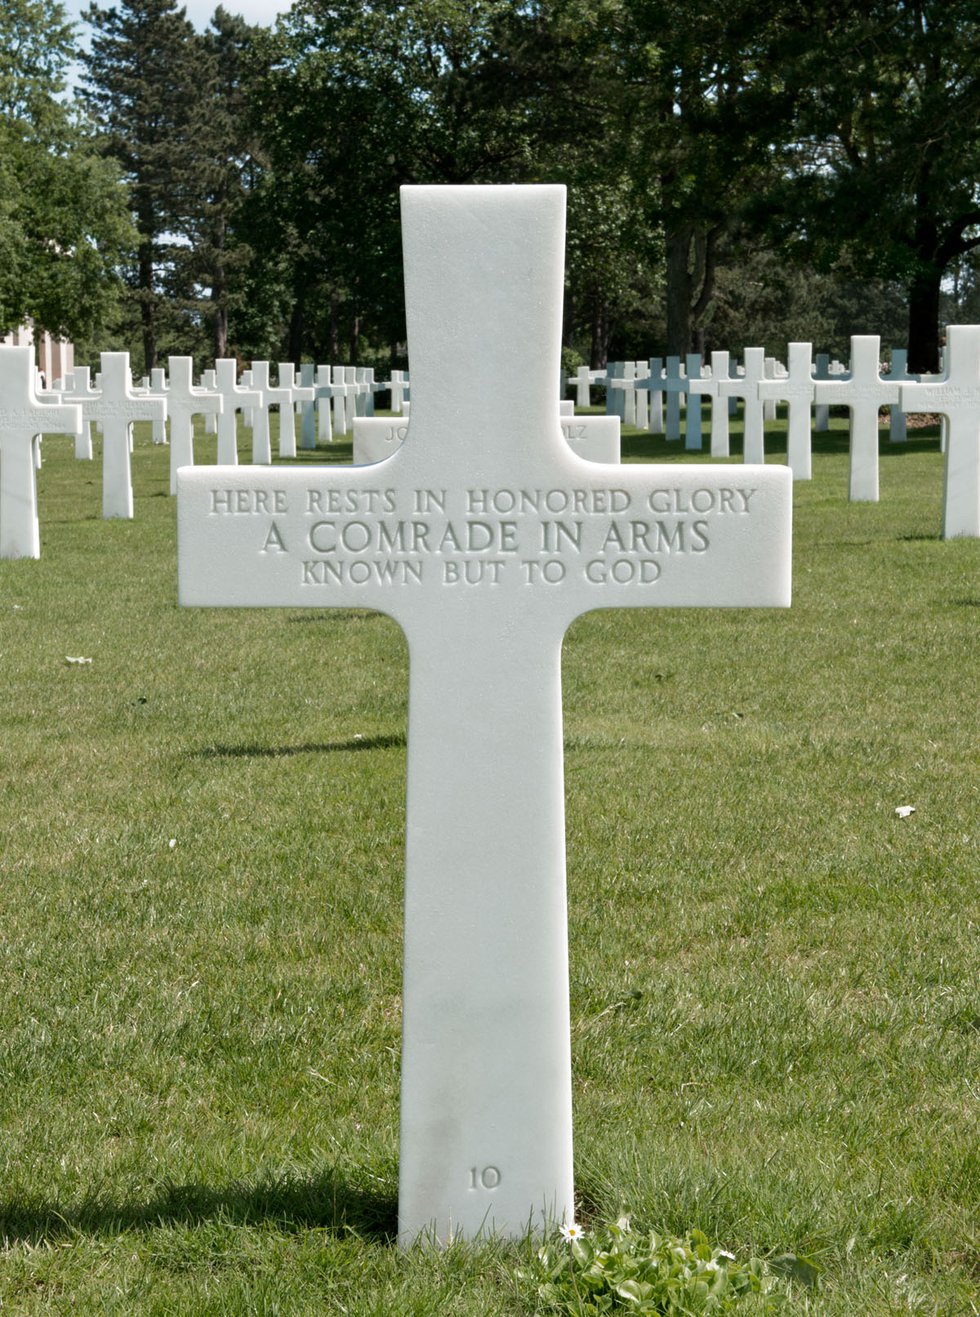 Leslie Hossack, “Here Rests In Honored Glory A Comrade In Arms, Normandy American Cemetery, Colleville-sur-Mer,” 2015